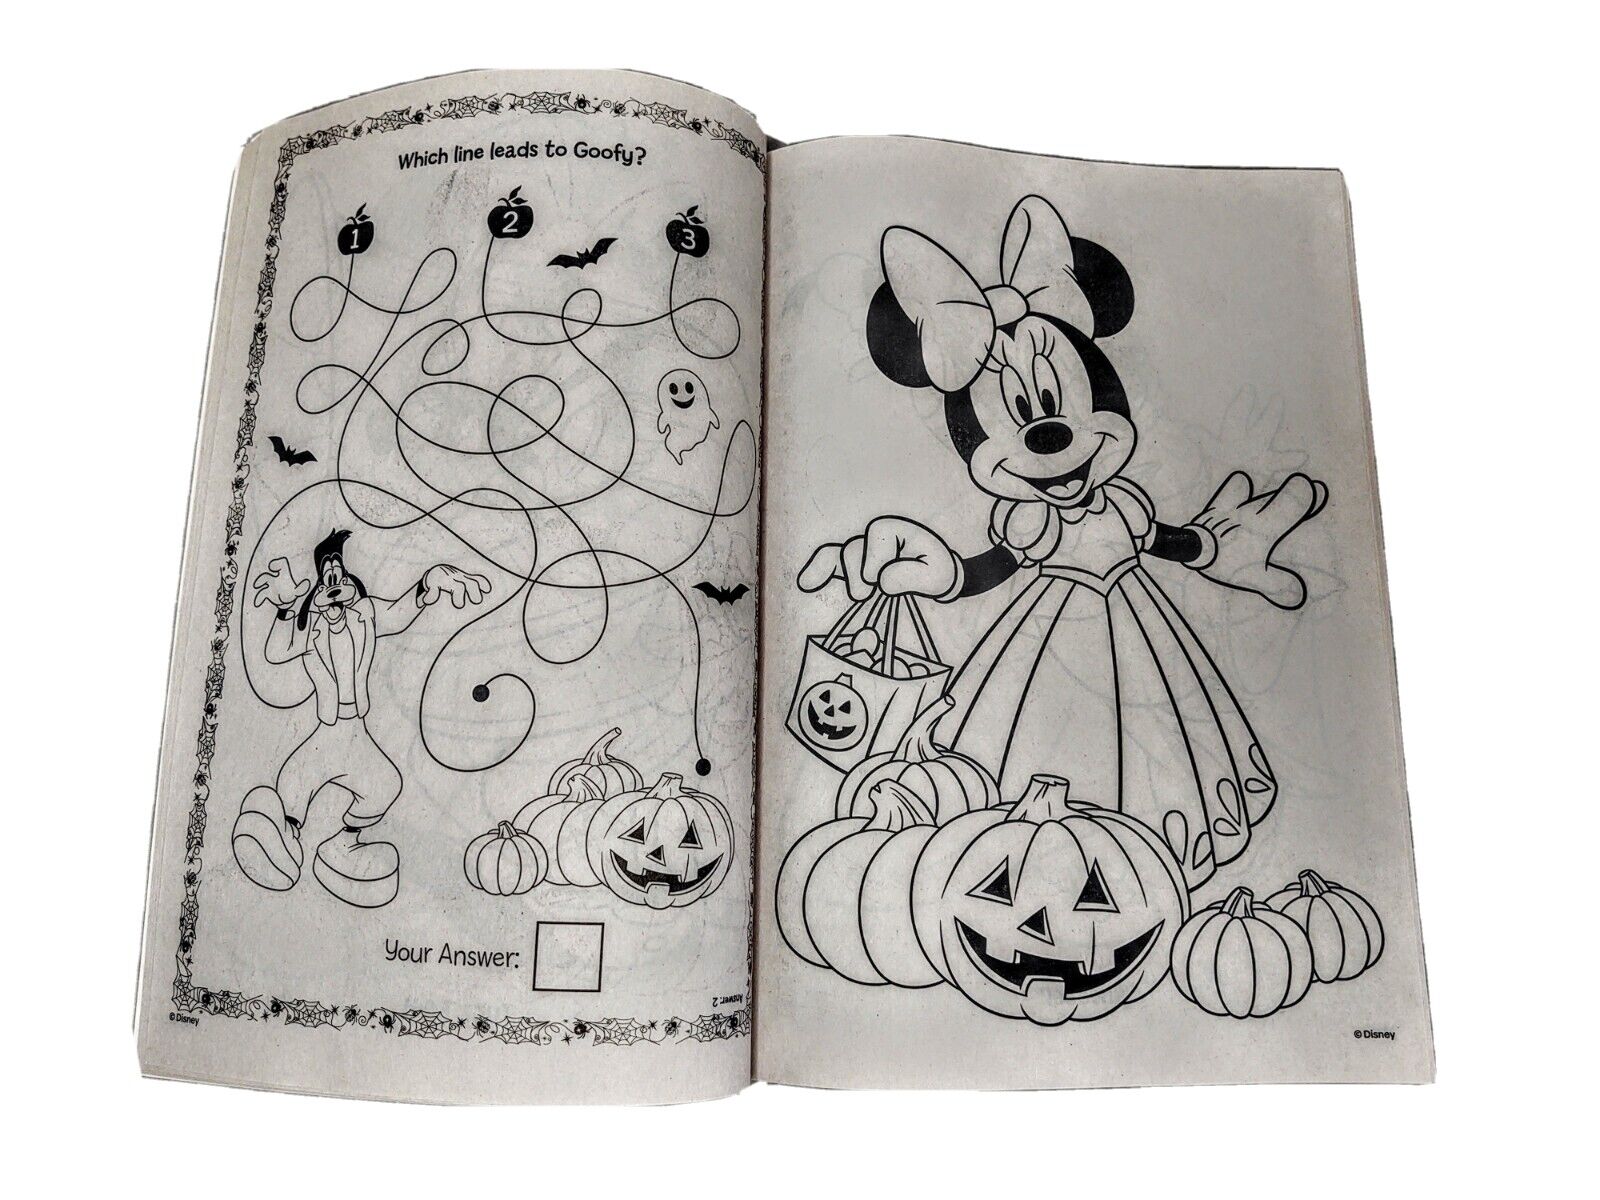 Disney halloween mickey mouse minnie mouse witch jumbo coloring book bendon